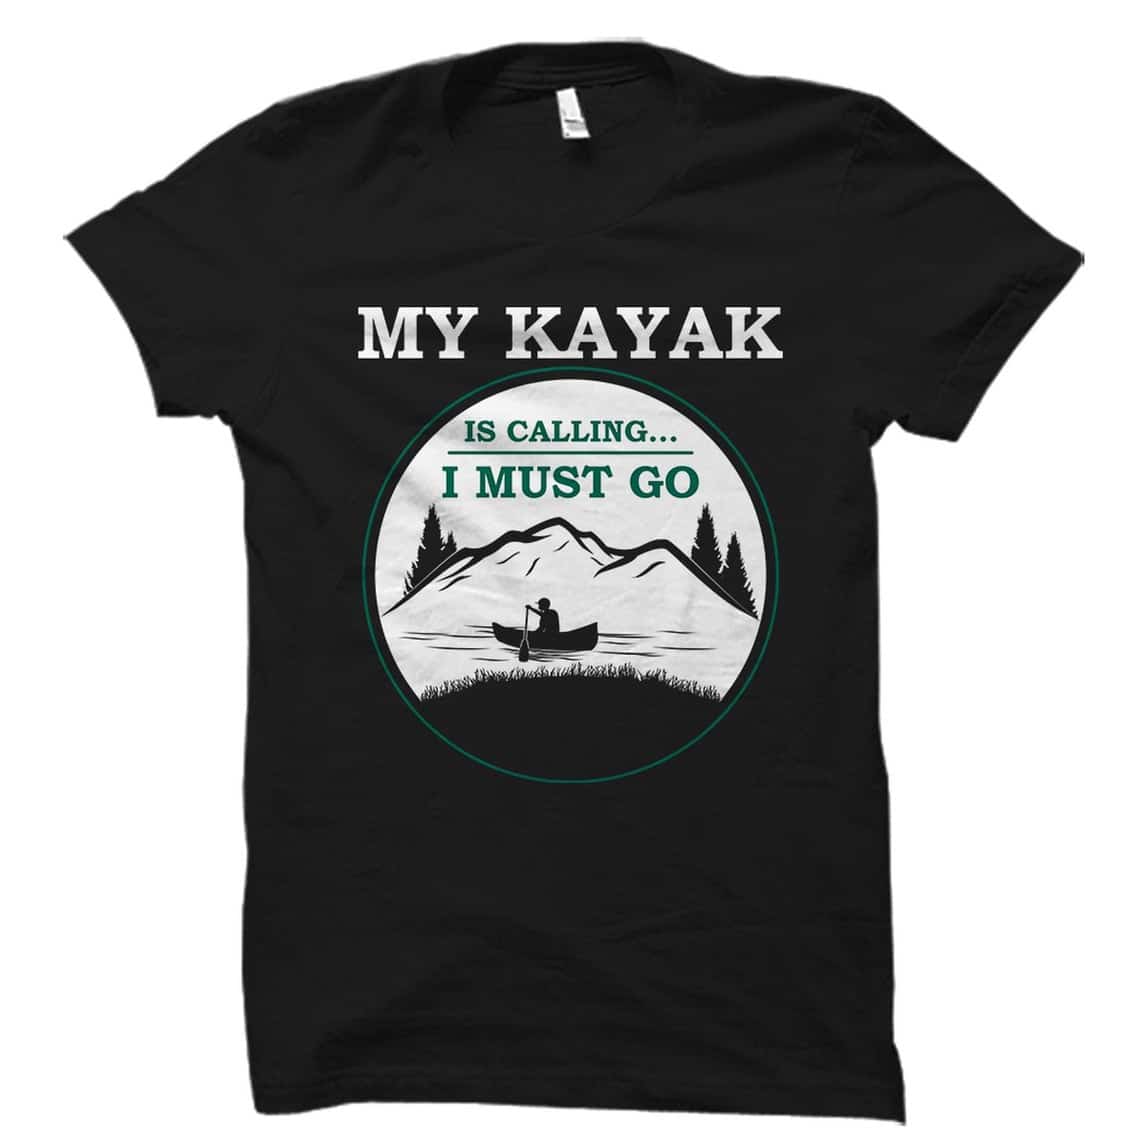 Personalized Shirt for an Avid Kayaker